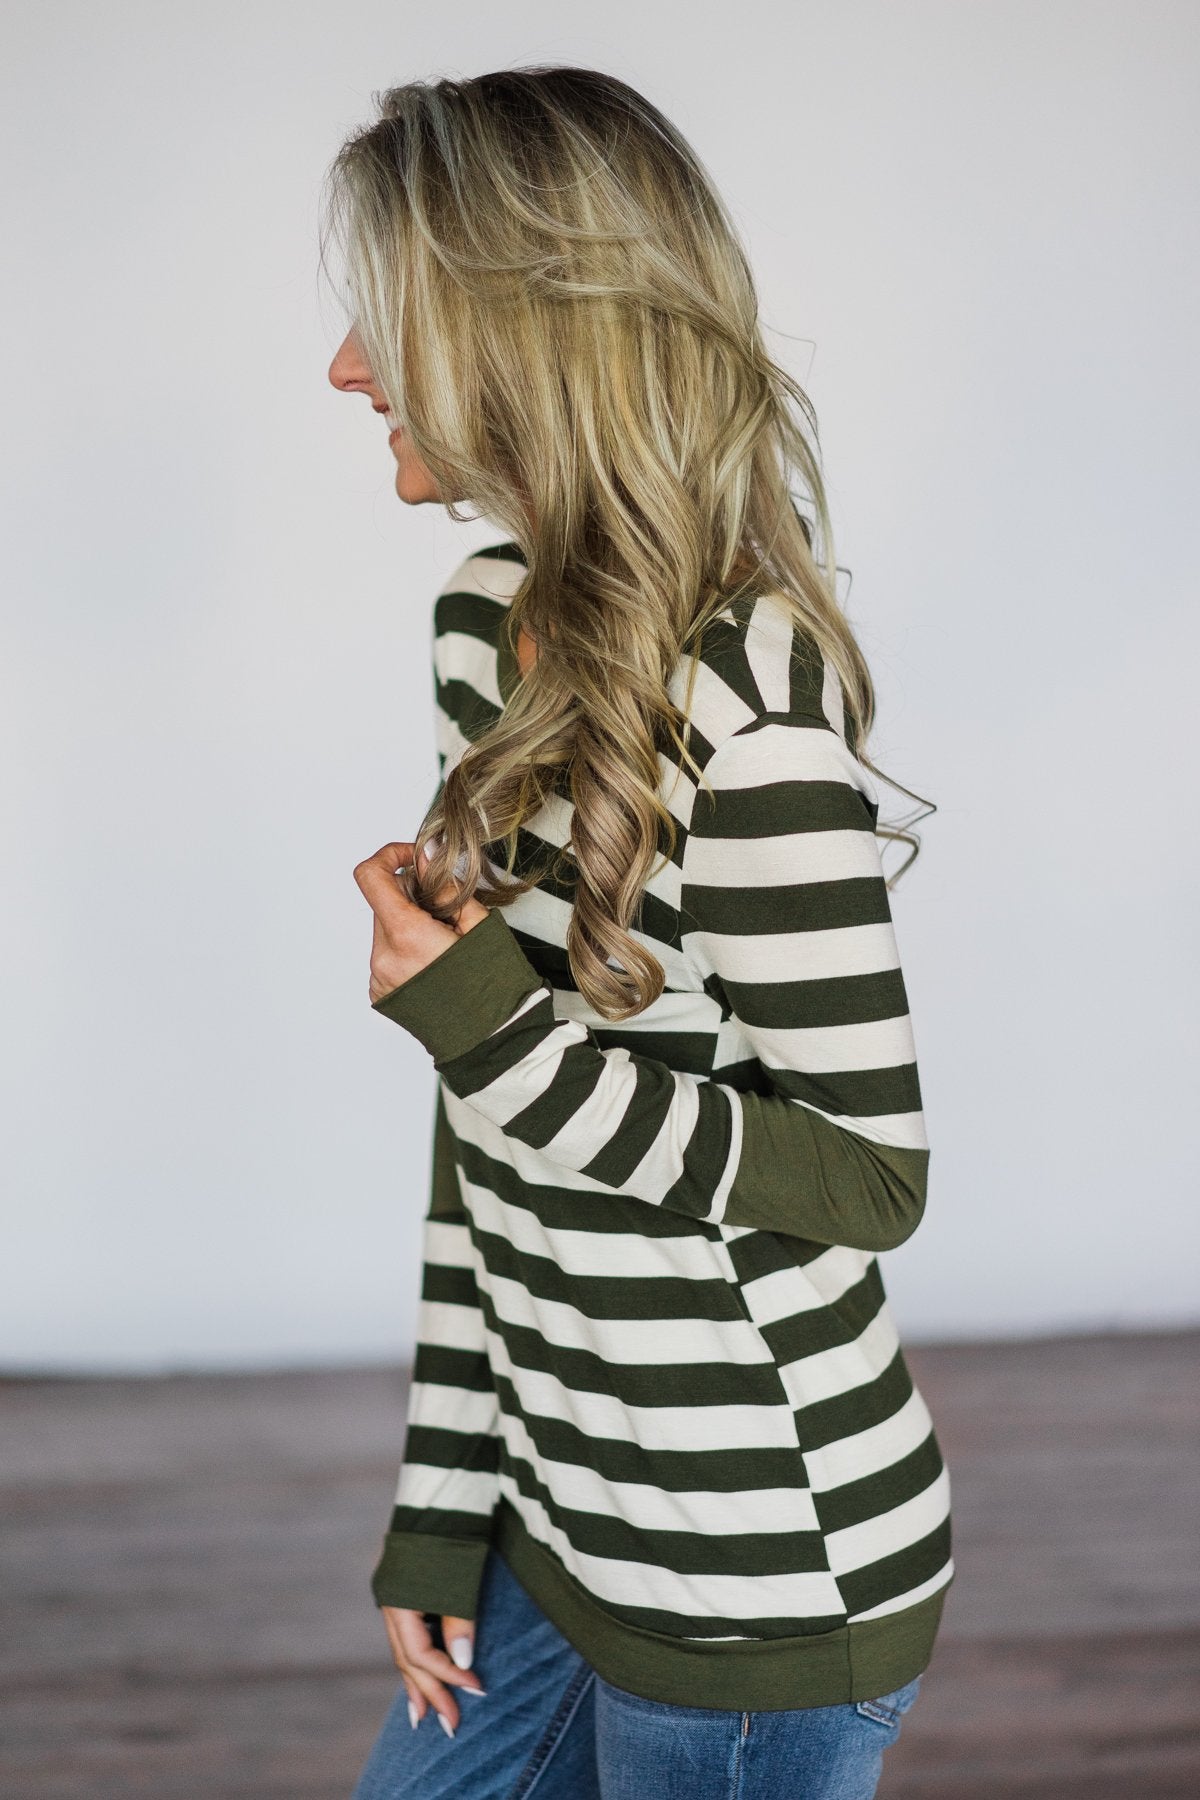 Dreams of Romance Olive Striped Top